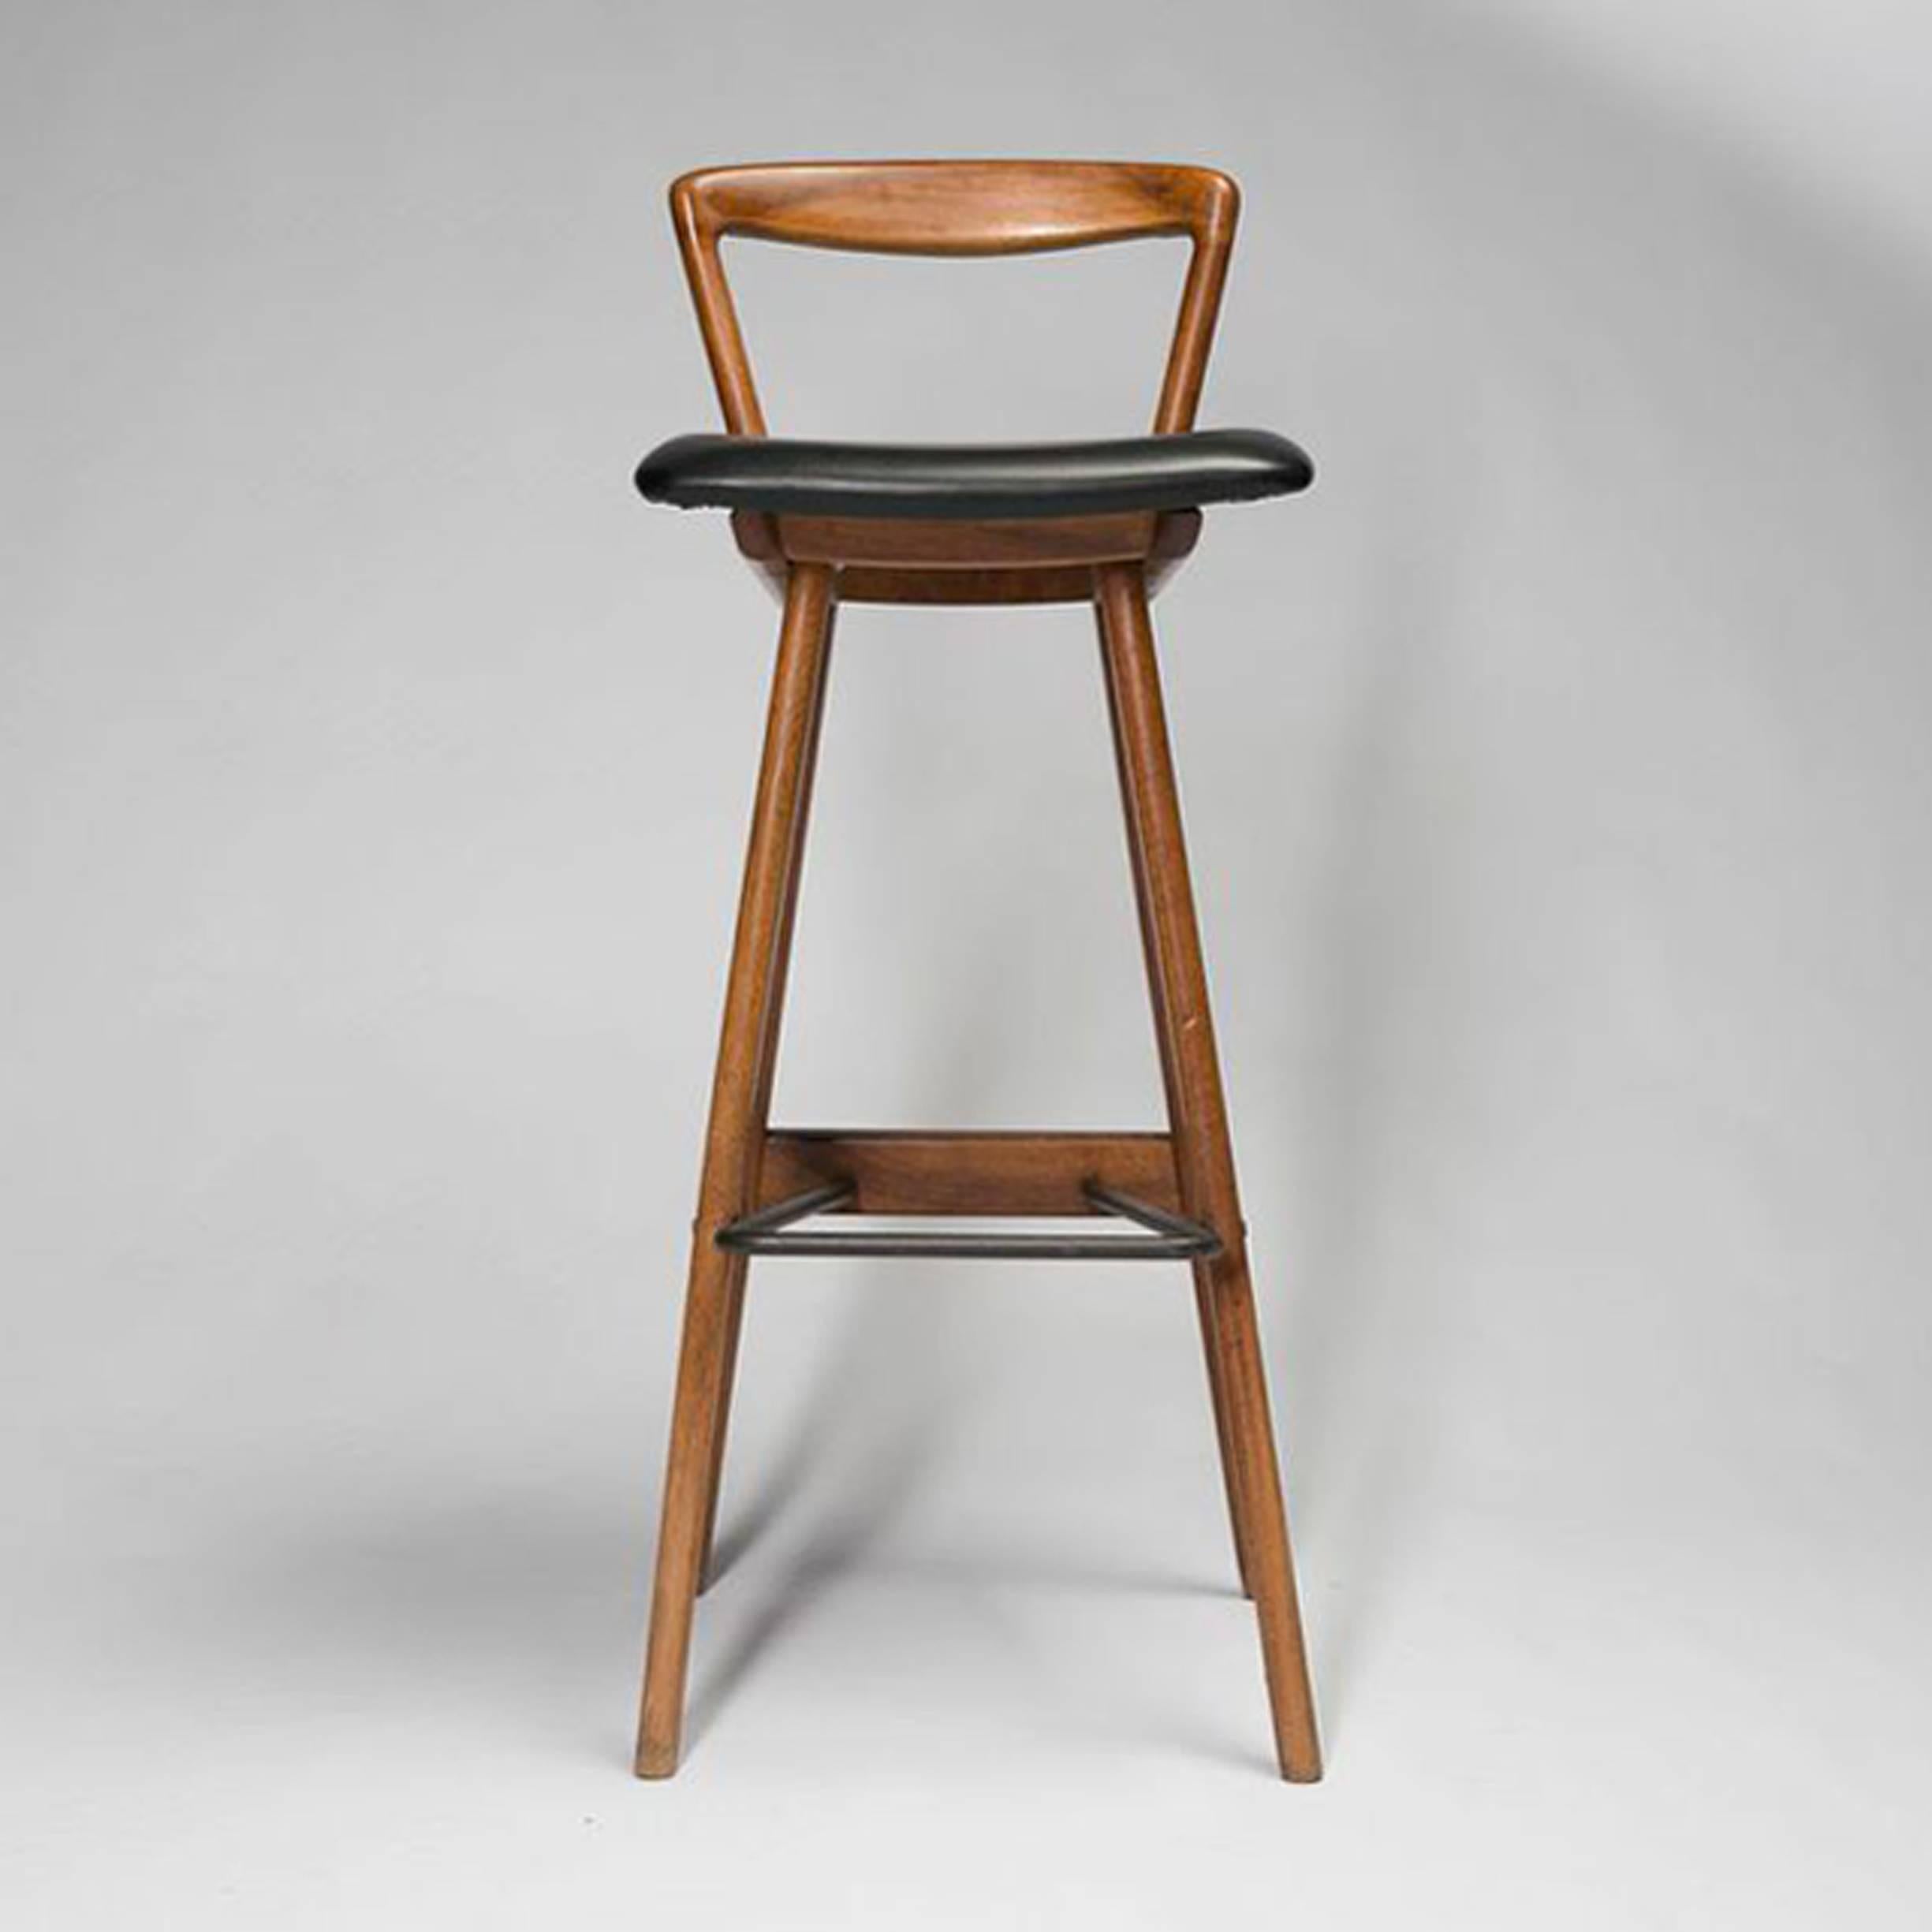 Pair of beautiful sculptured solid teak wood constructed barstools by Rosengren Hansen for Brande Møbelfabrik. Great lines and modern elegance make these barstools a perfect pair for any space. The high back rest provides great comfort.